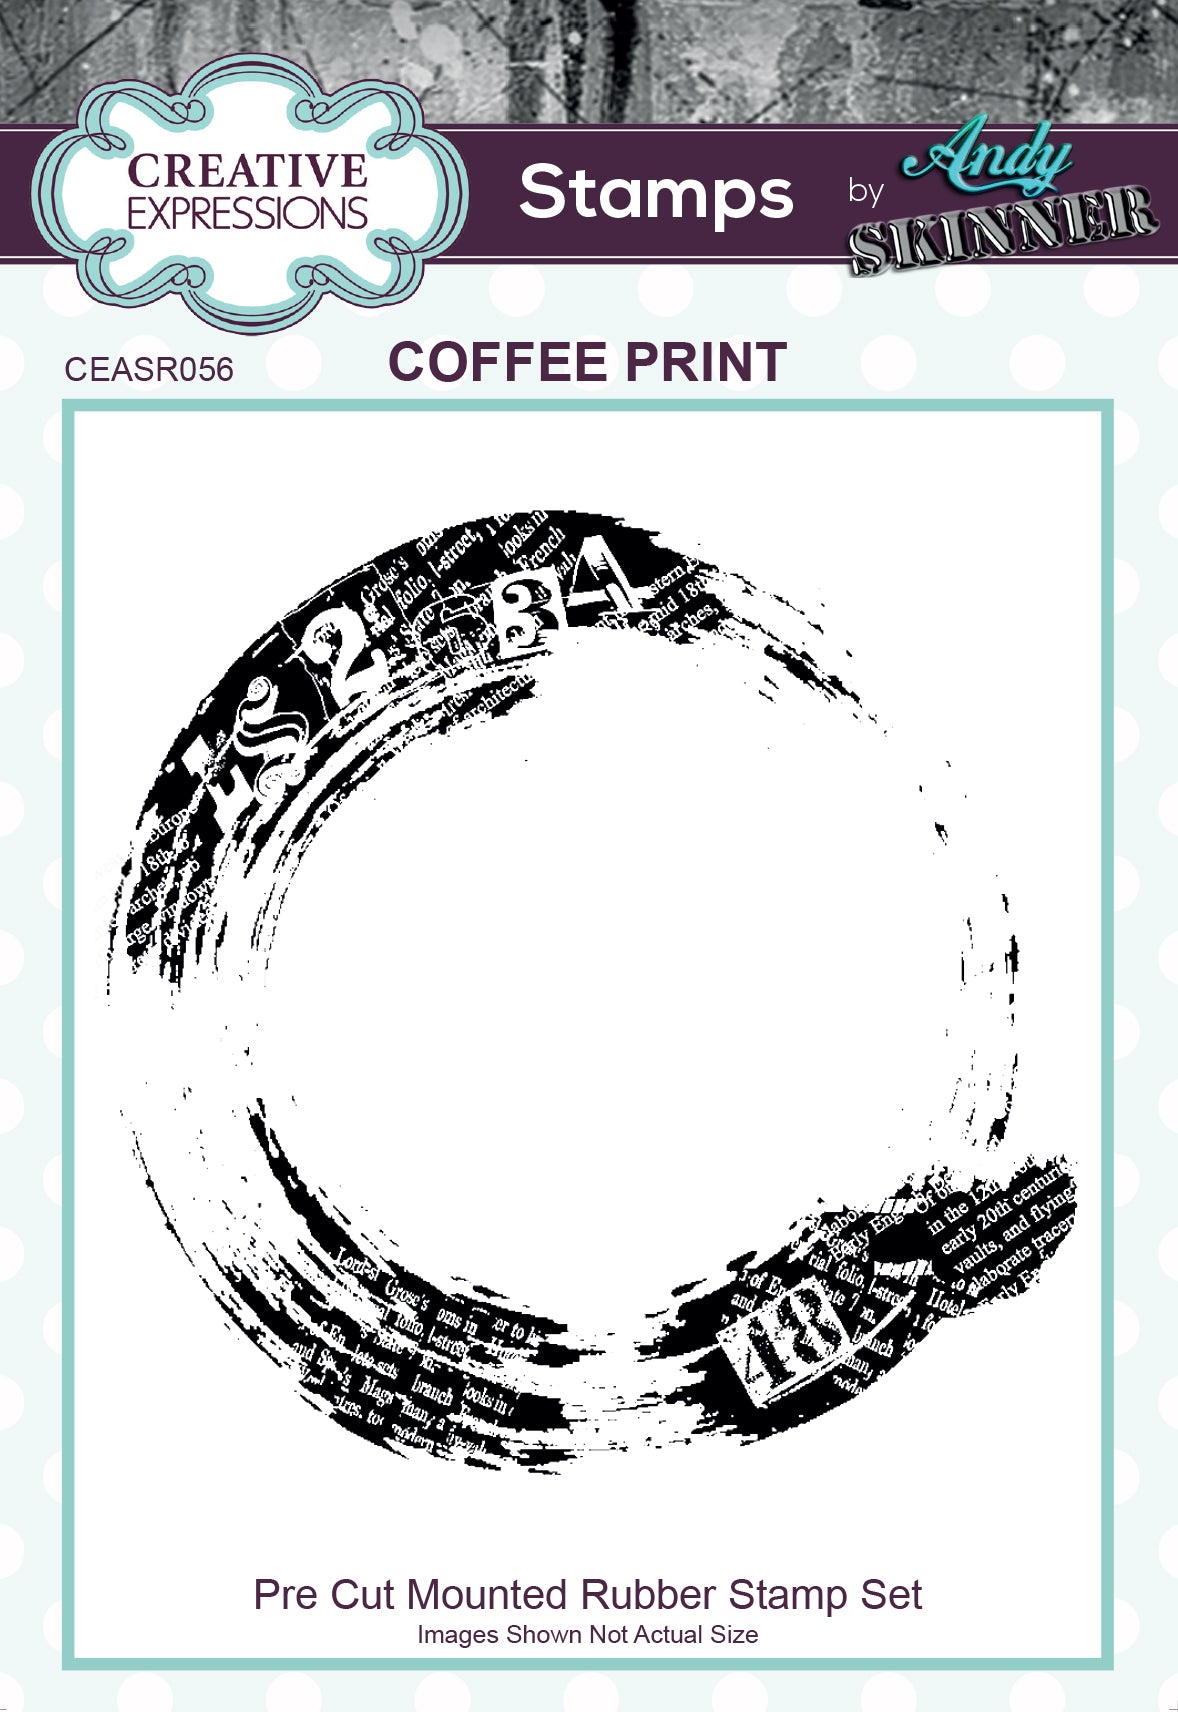 Creative Expressions Andy Skinner Coffee Print 2.9 in x 2.9 in Rubber Stamp